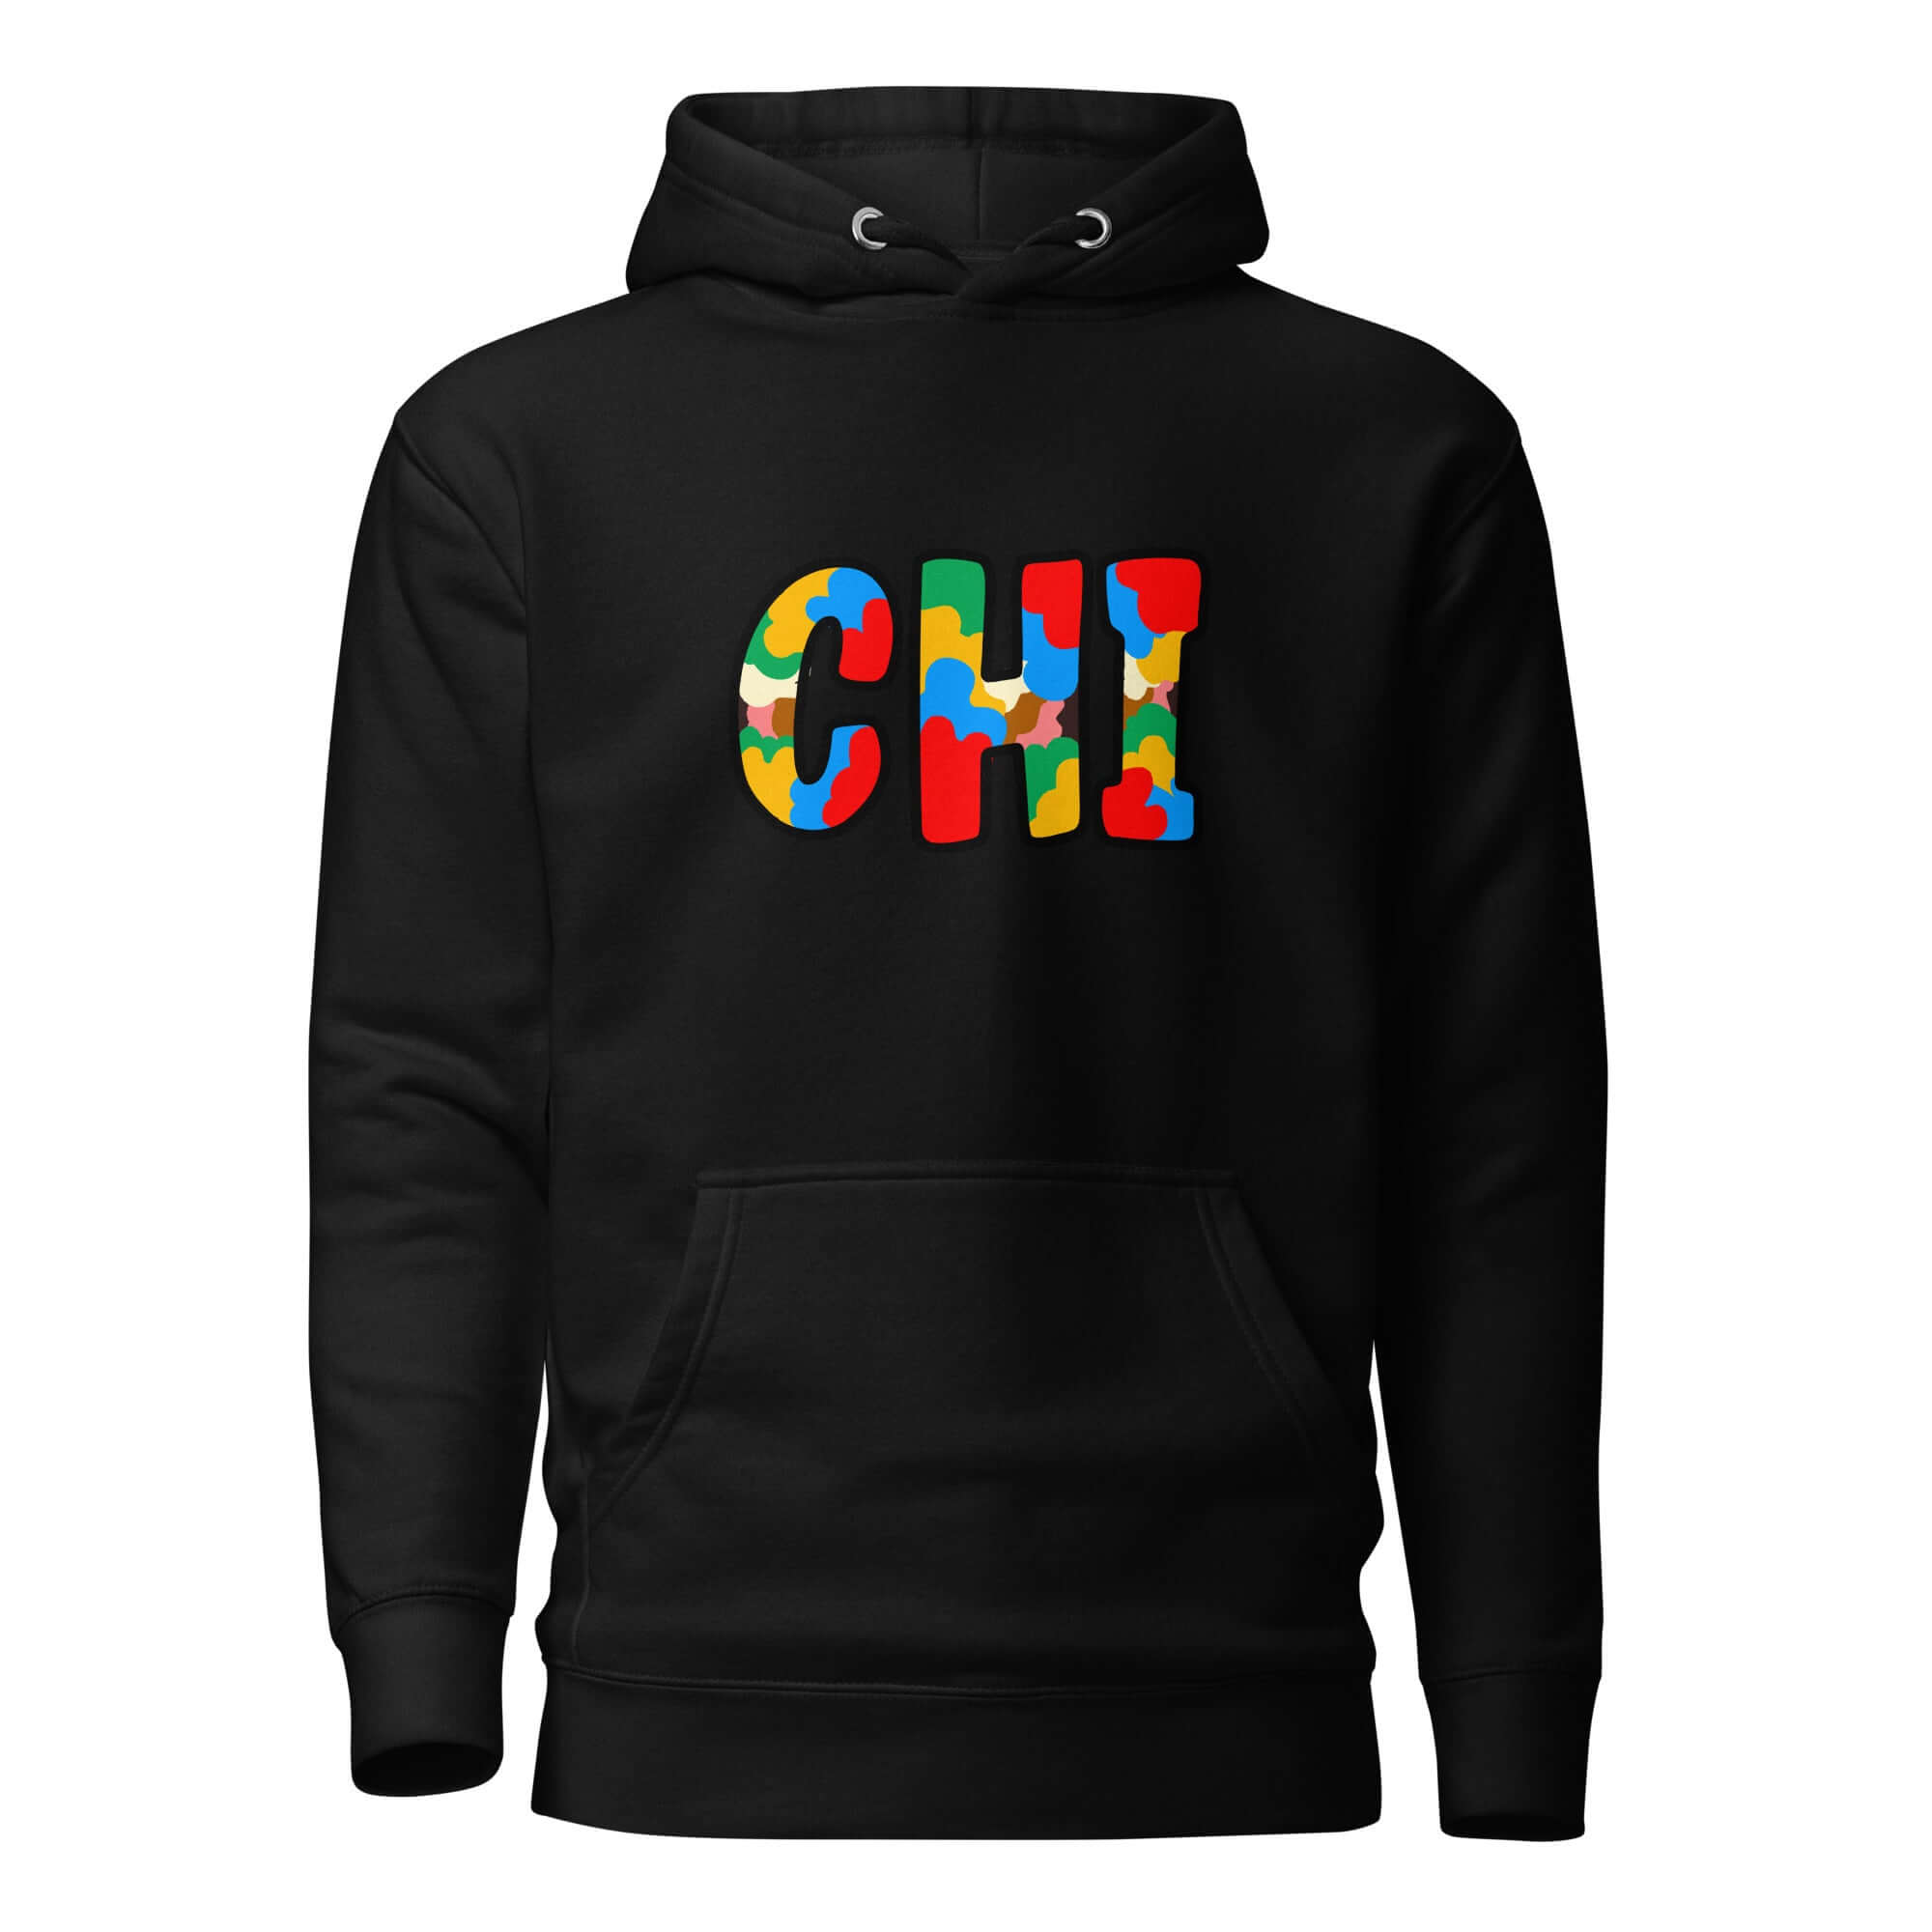 The City Collection CHI Unisex Hoodie